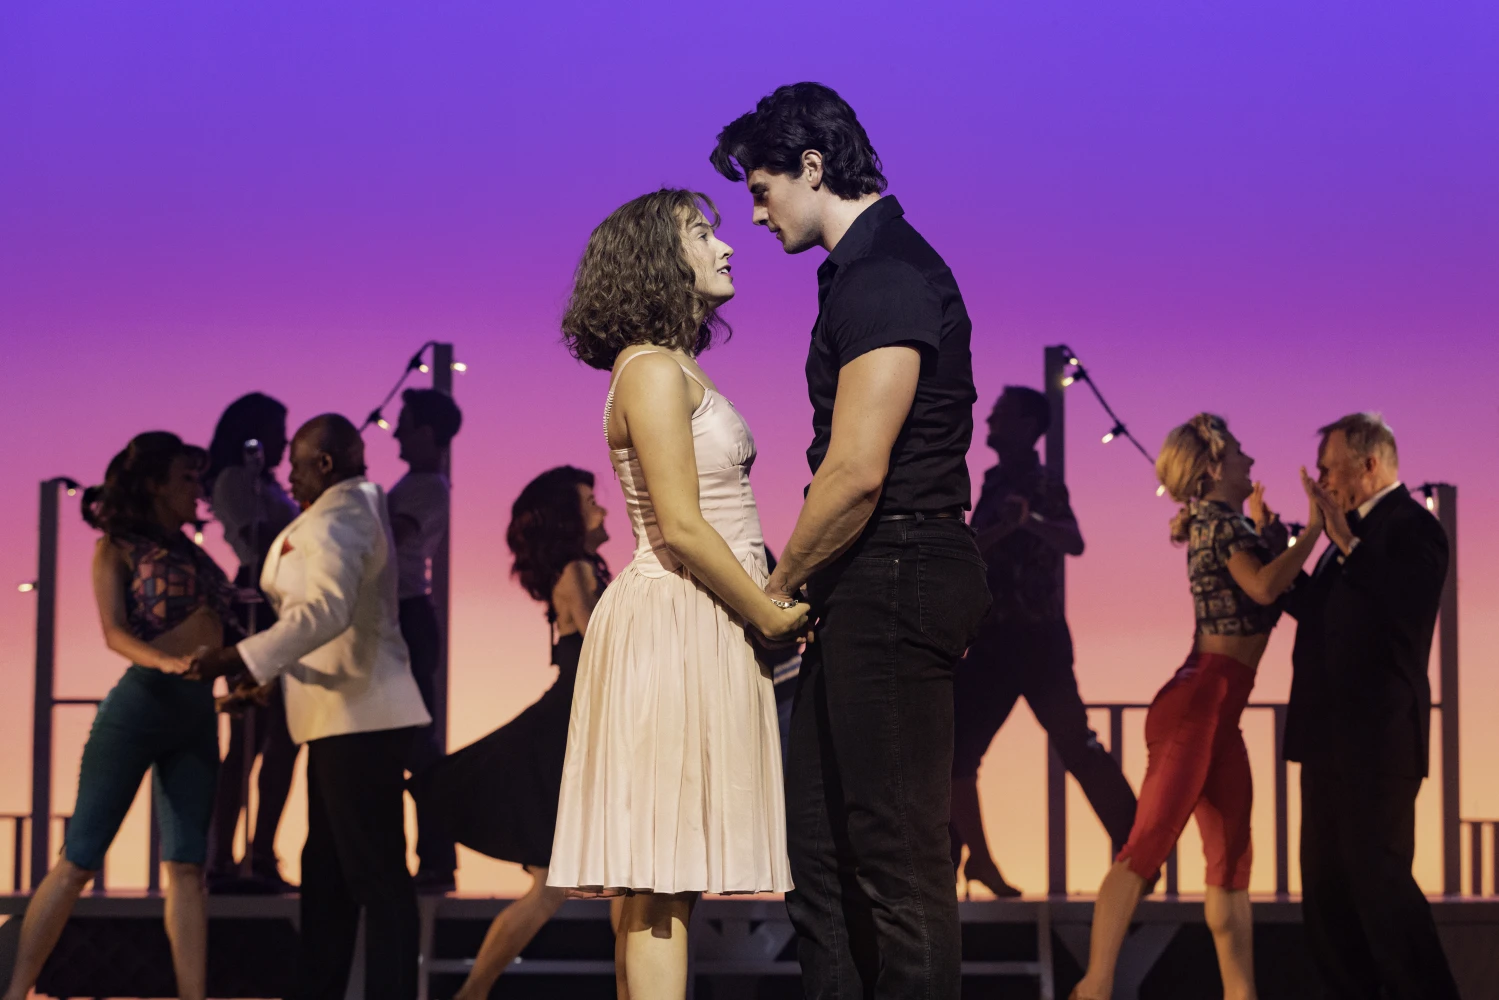 Dirty Dancing - The Classic Story on Stage: What to expect - 4